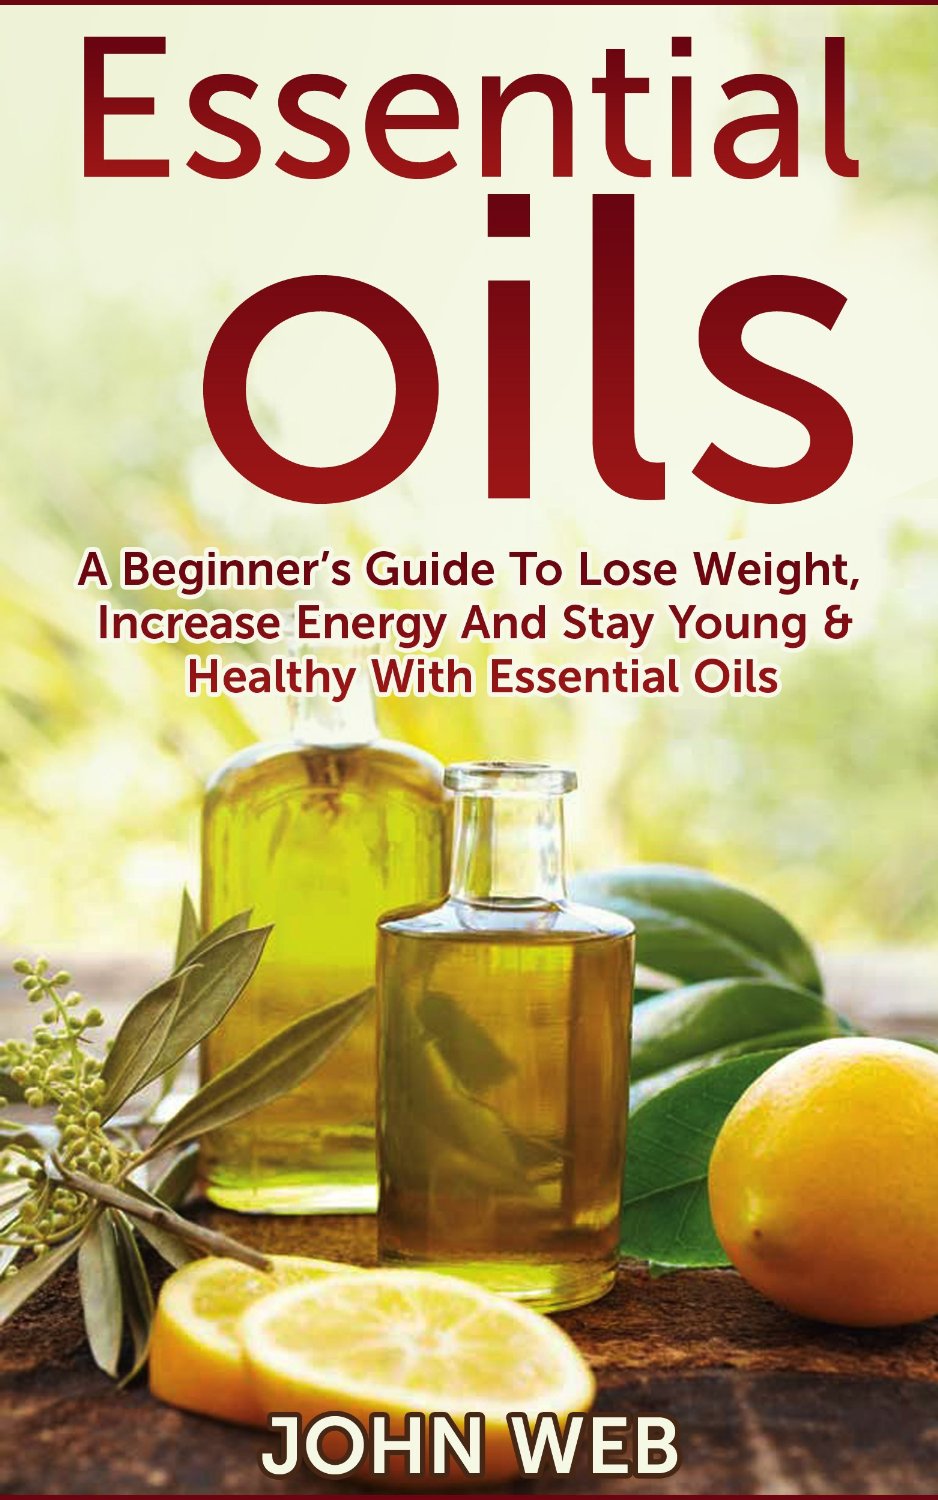 Essential Oils – A Beginner’s Guide To Lose Weight, Increase Energy And Stay Young & Healthy With Essential Oils by John Web